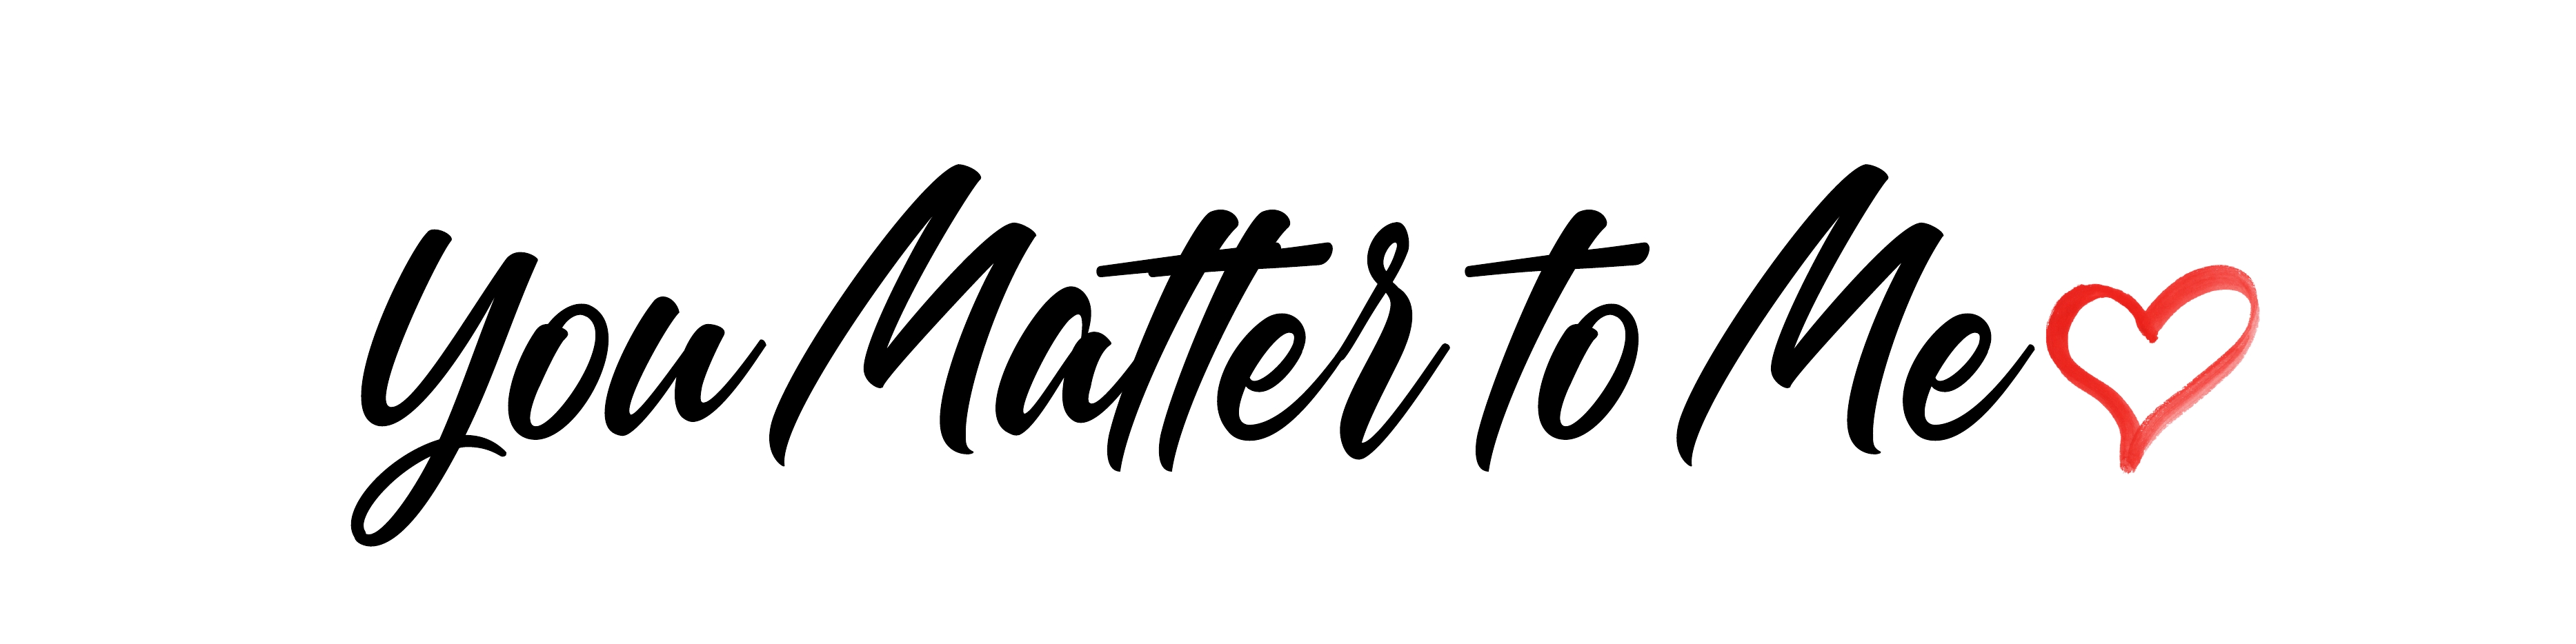 Yes, You Matter Most